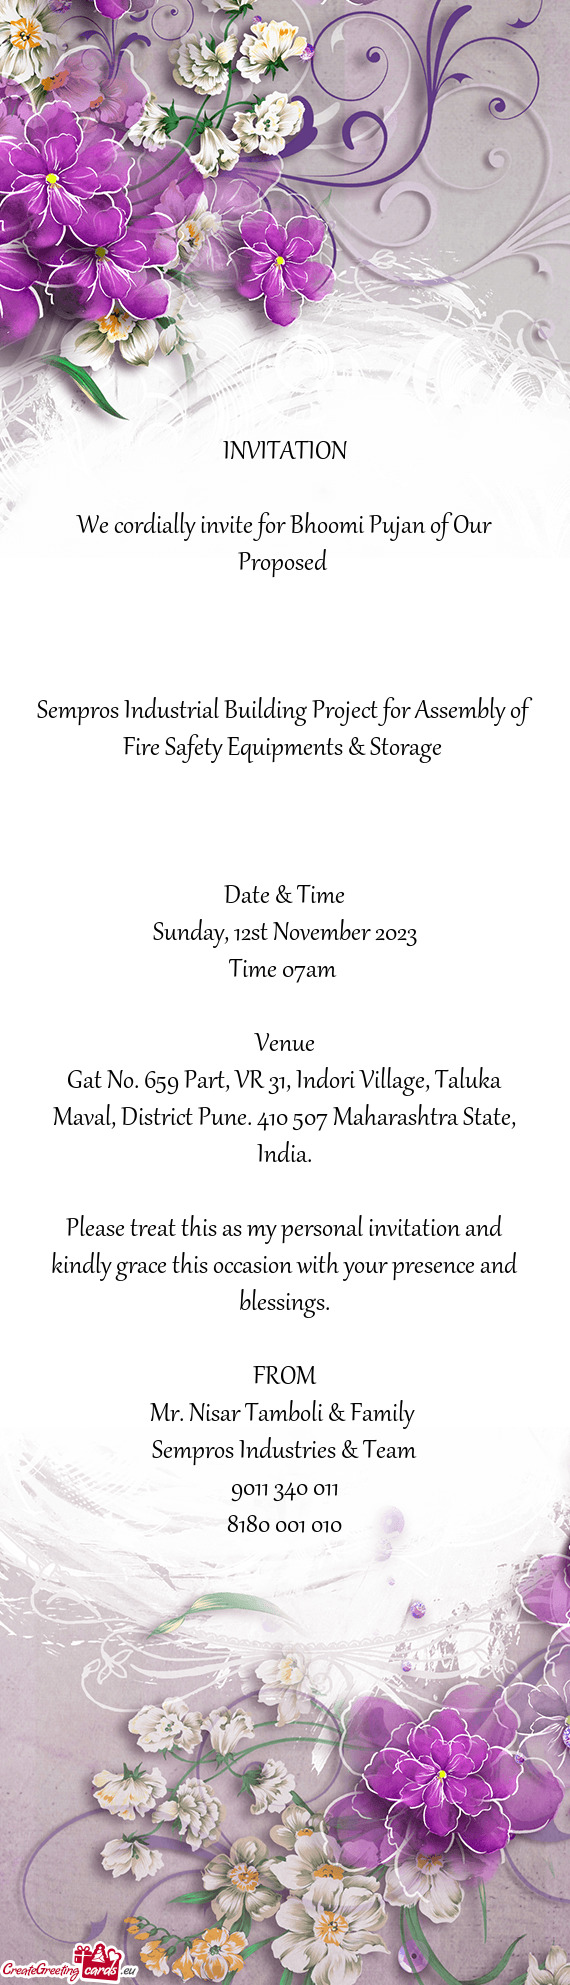 We cordially invite for Bhoomi Pujan of Our Proposed